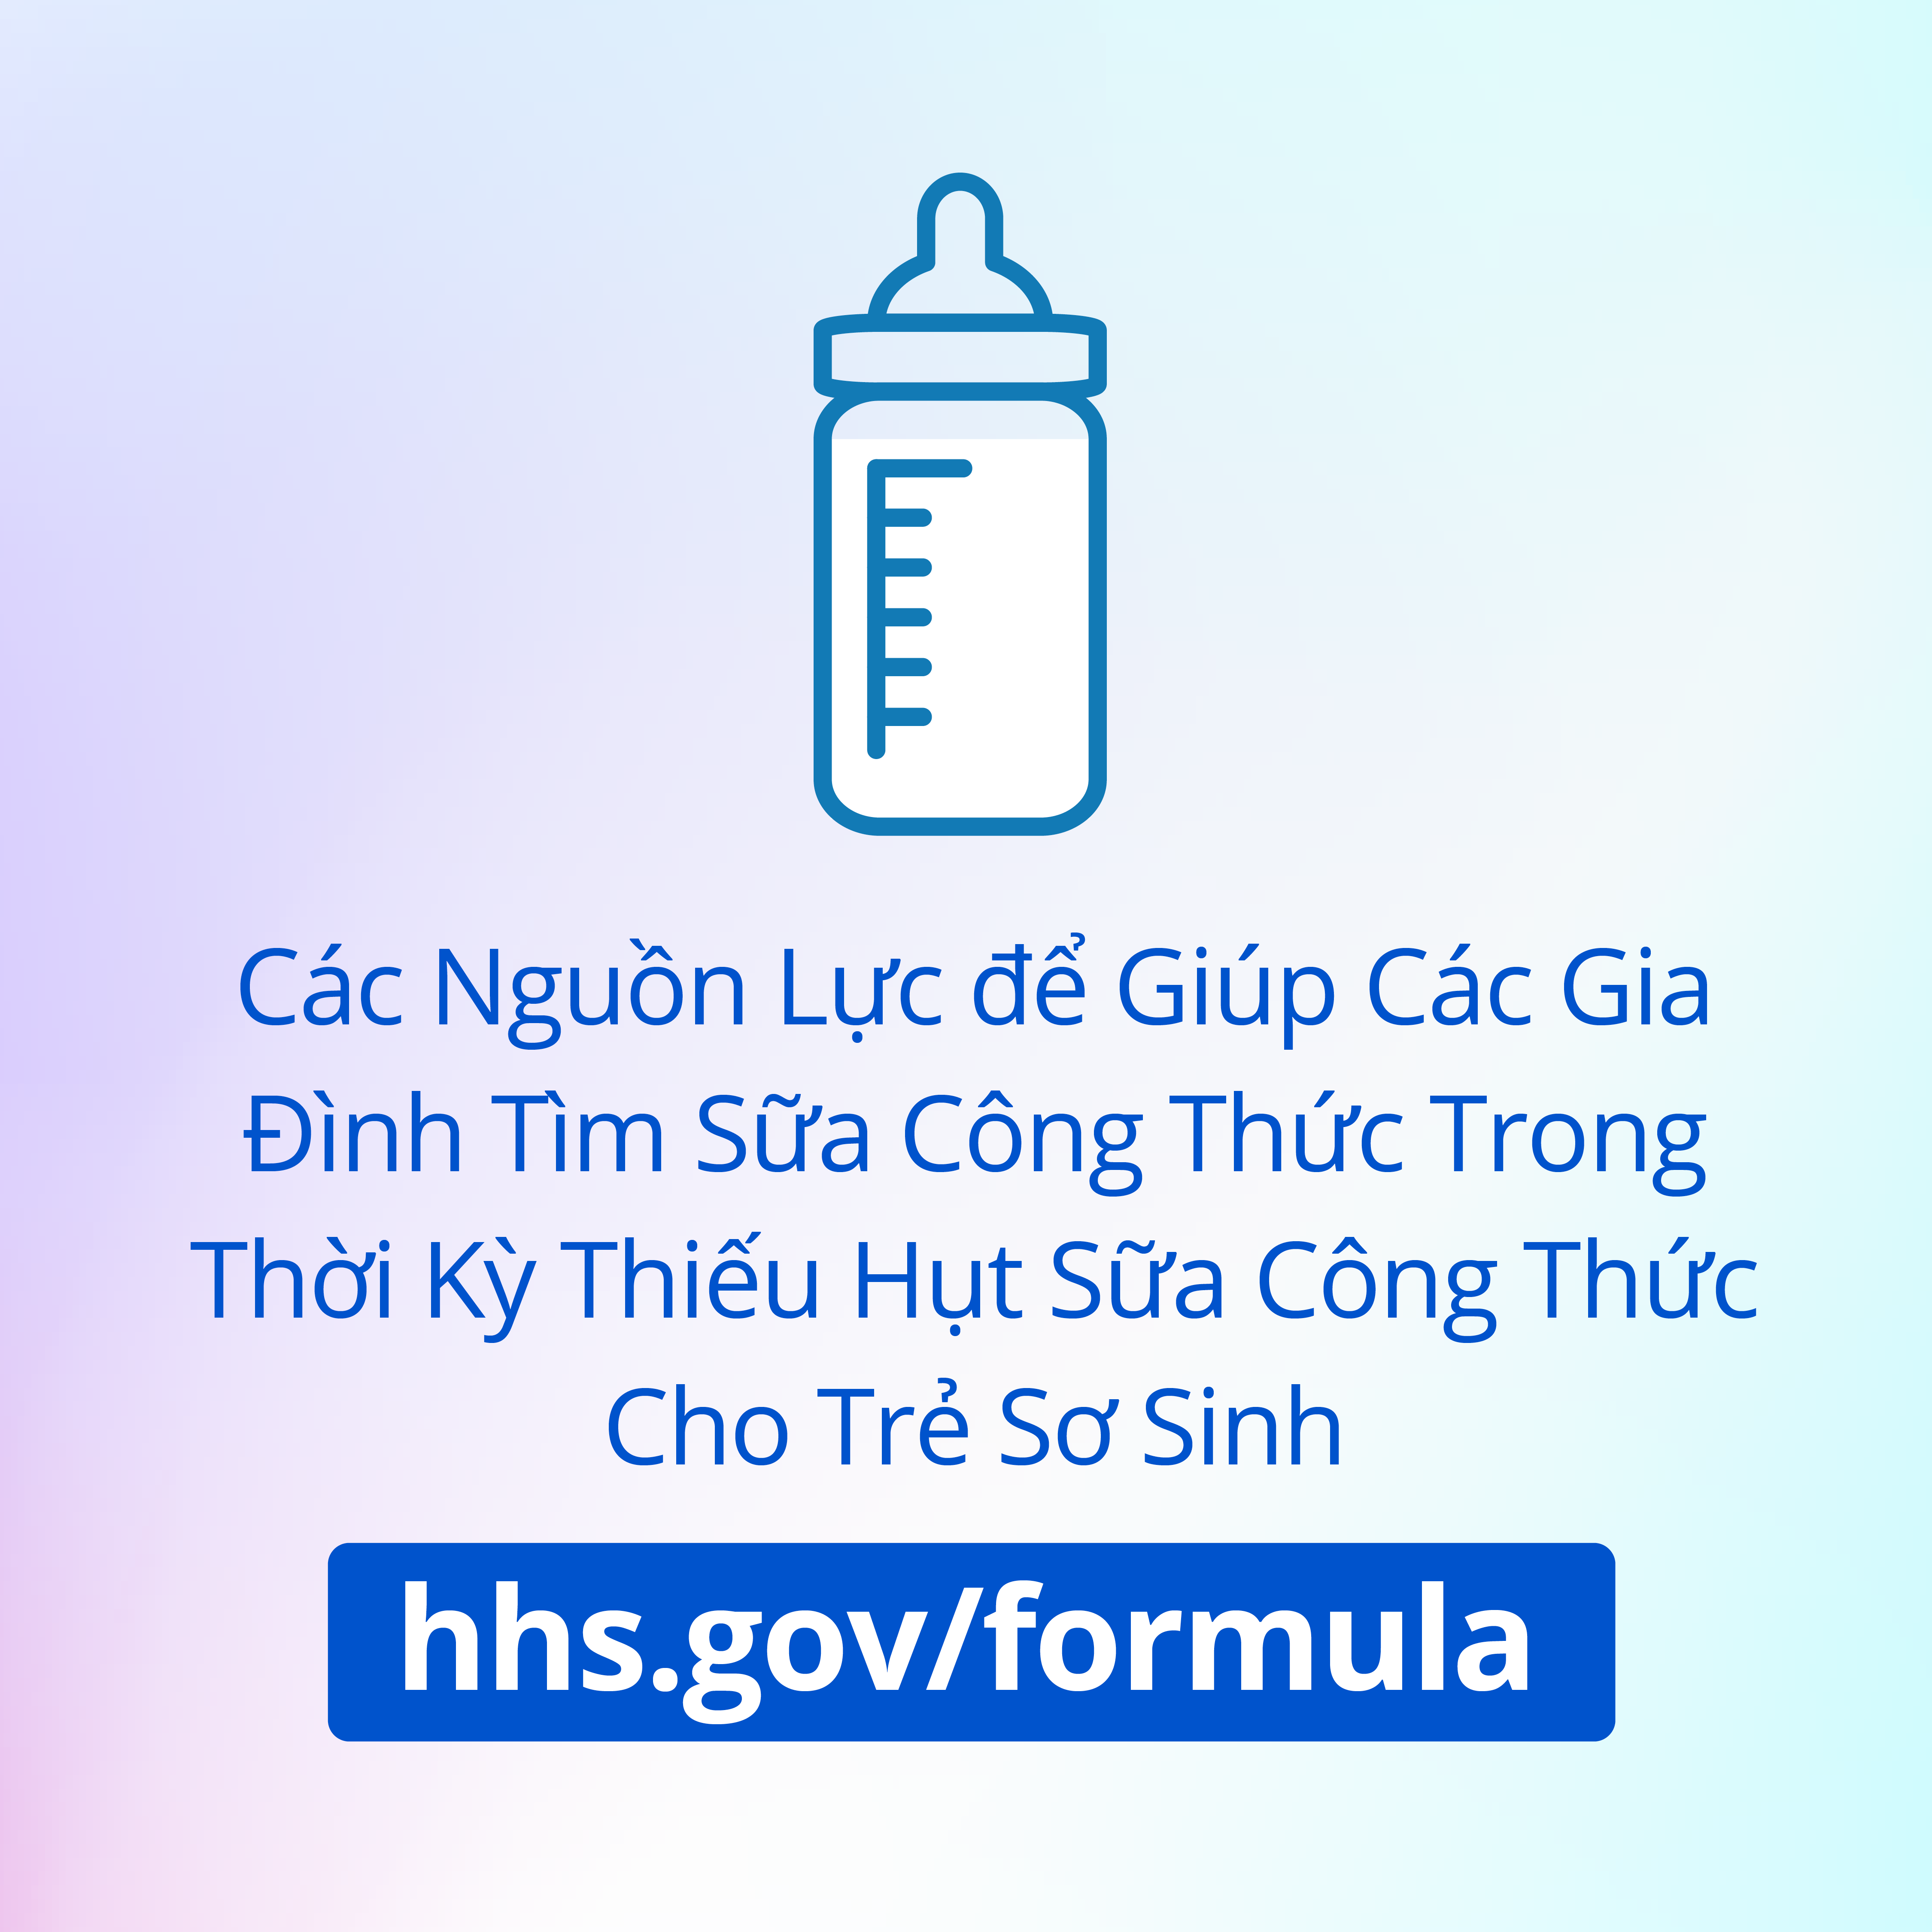 Instagram promo graphic to find resources for the infant formula shortage at hhs.gov/formula in Vietnamese.